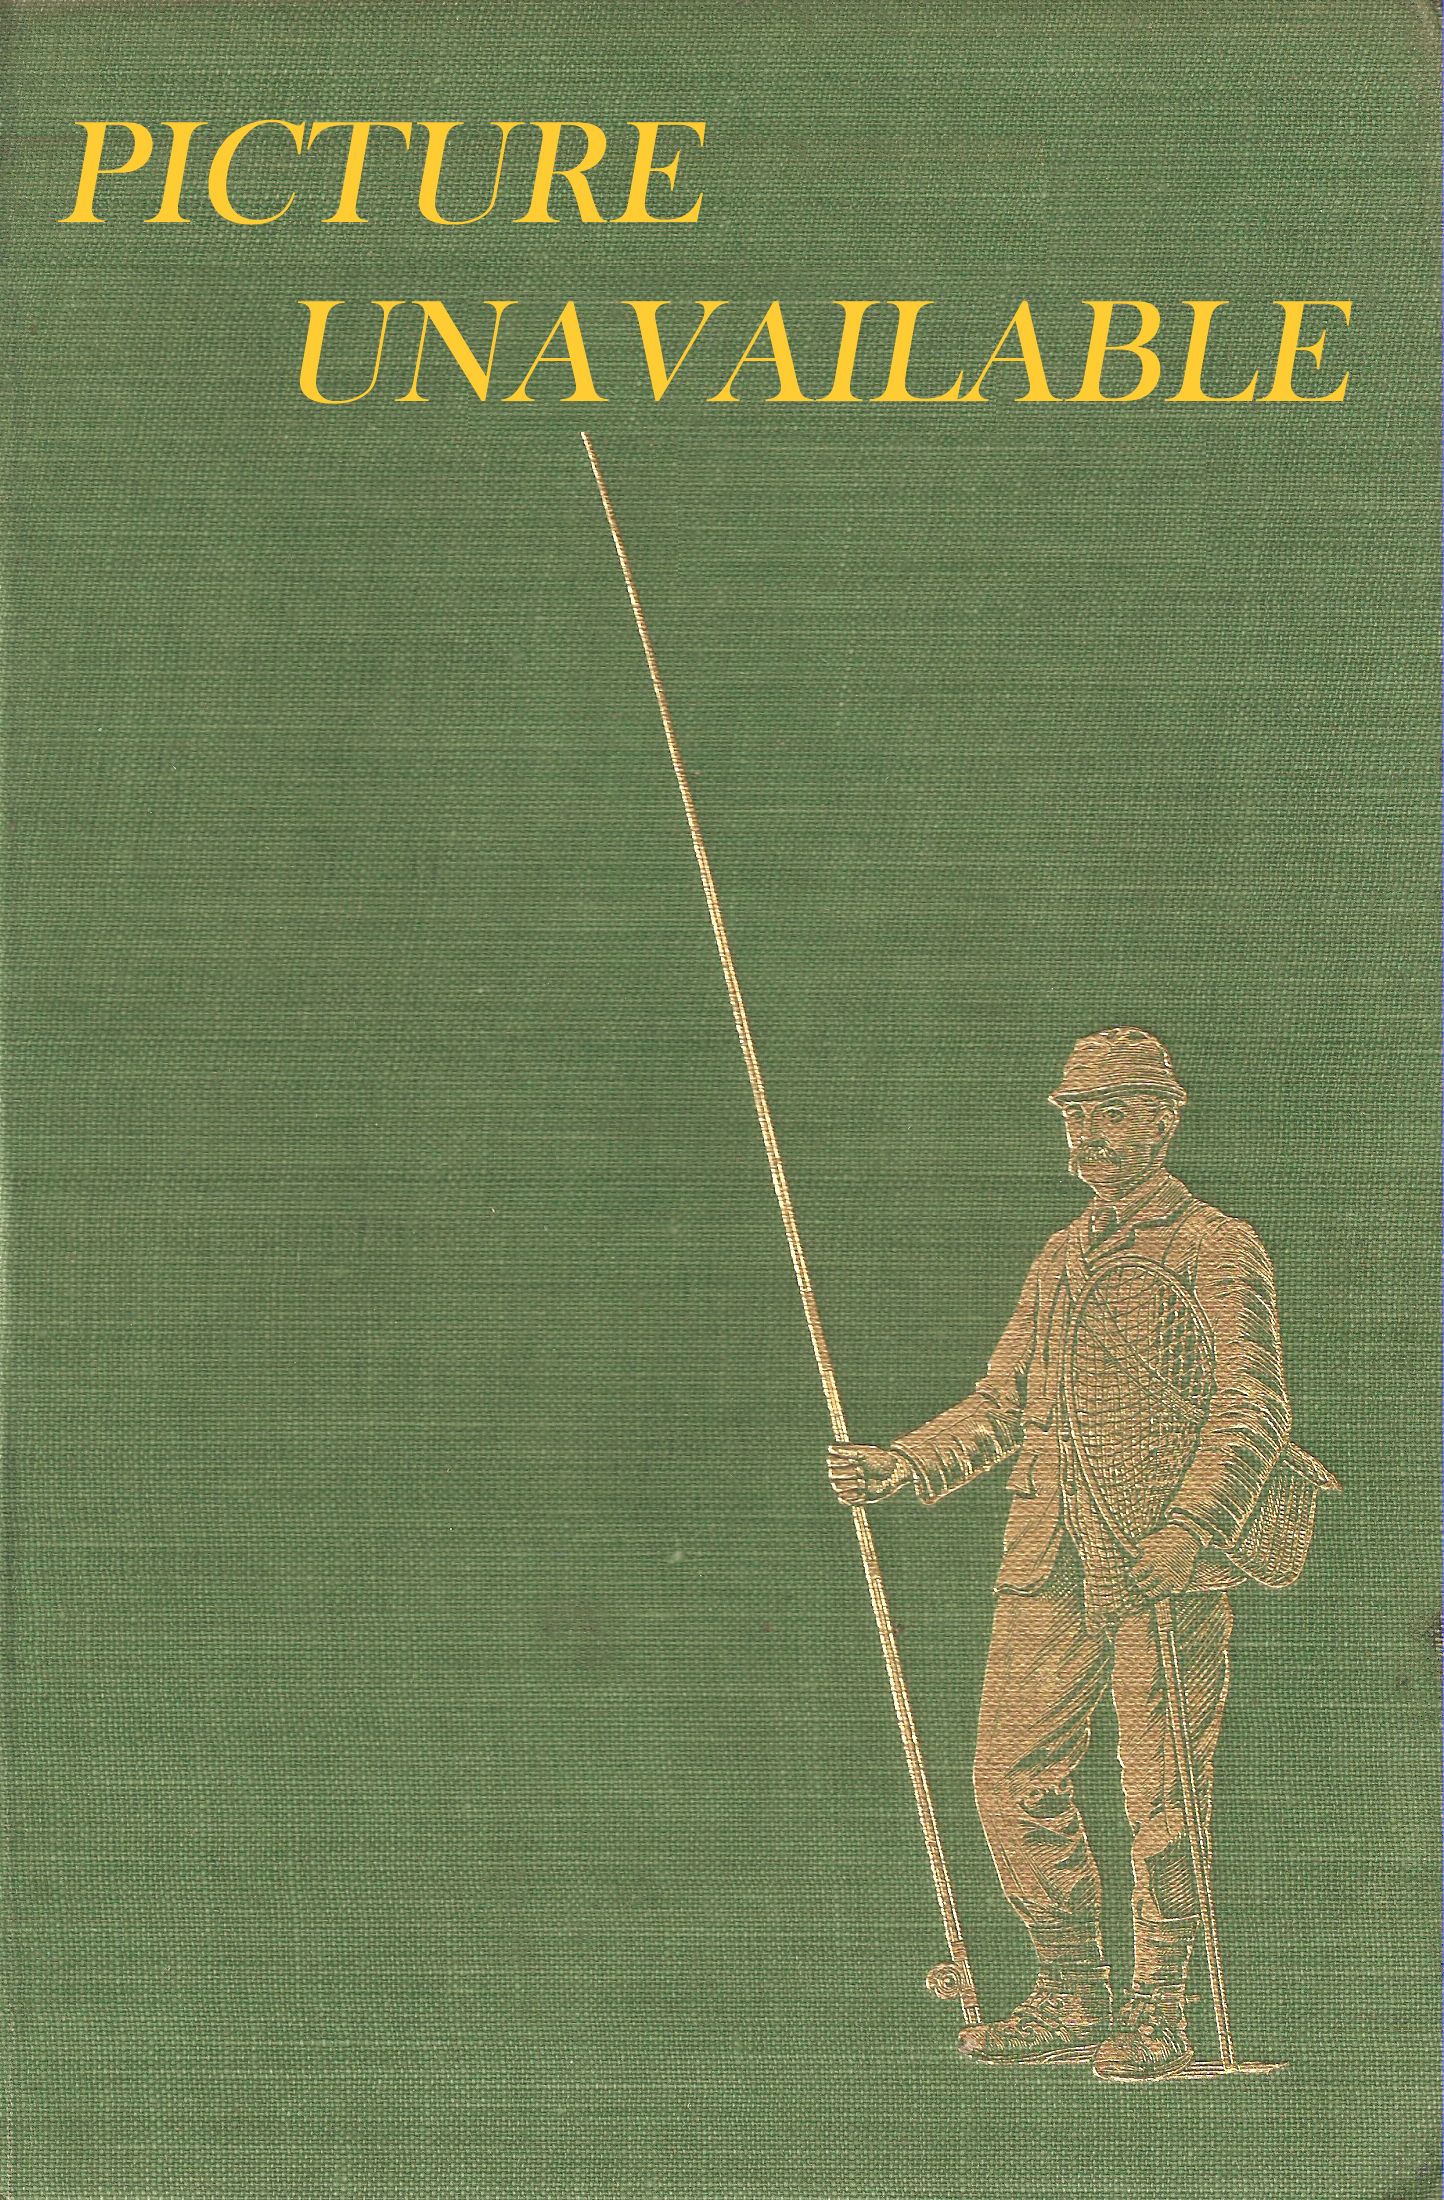 REGIONAL ANGLING LITERATURE: a checklist of books on angling and the  salmon fisheries in Scotland, Northern England, Wales and Ireland, with an  introductory survey. By R.J.W. Coleby.